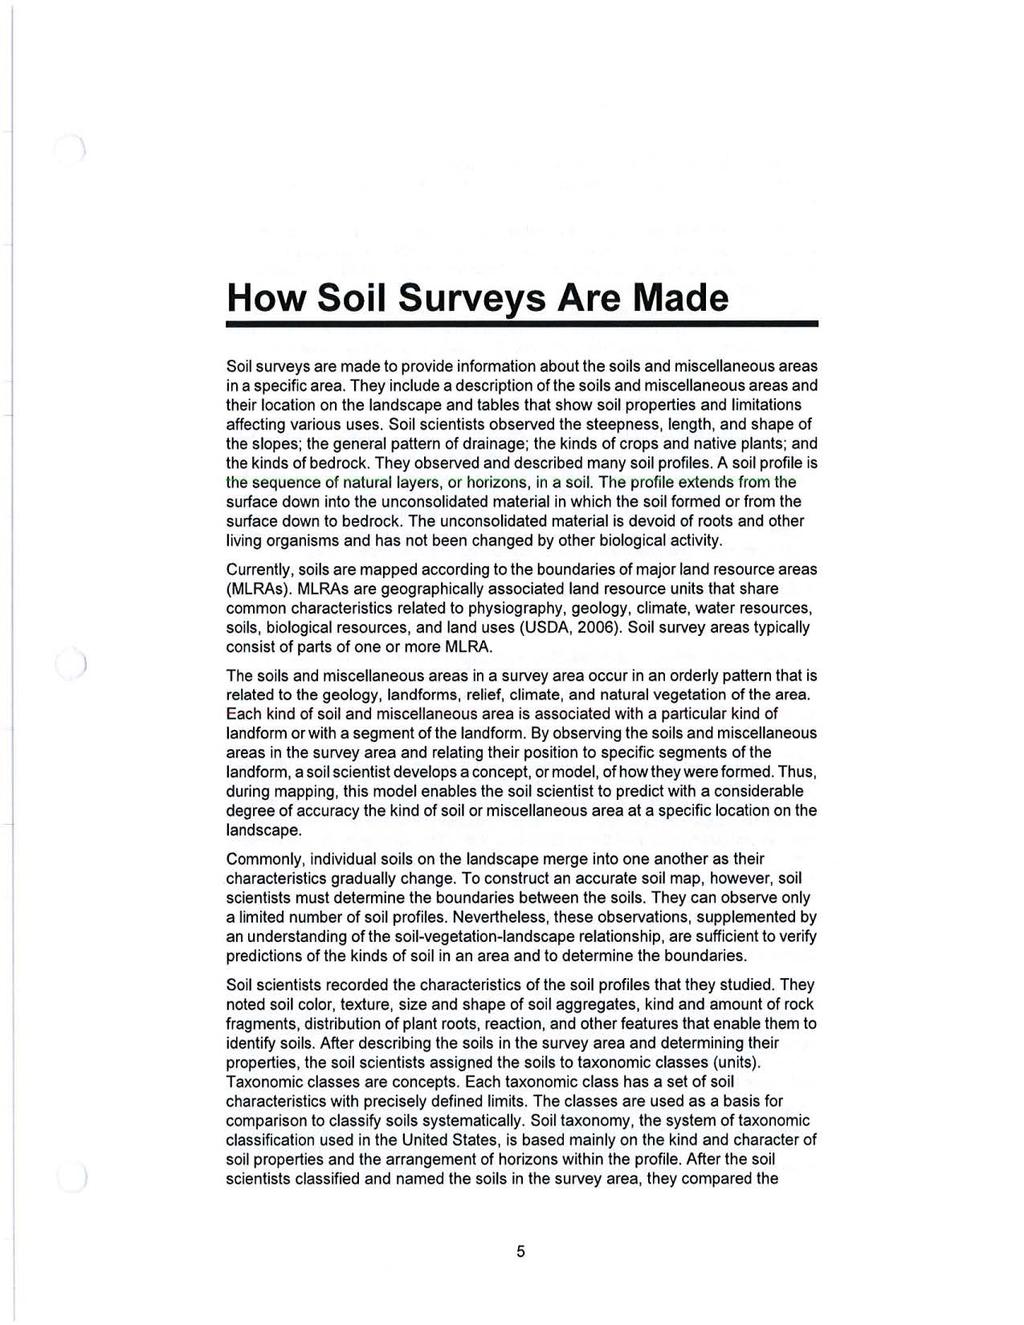 How Soil Surveys Are Made Soil surveys are made to provide information about the soils and miscellaneous areas in a specific area.